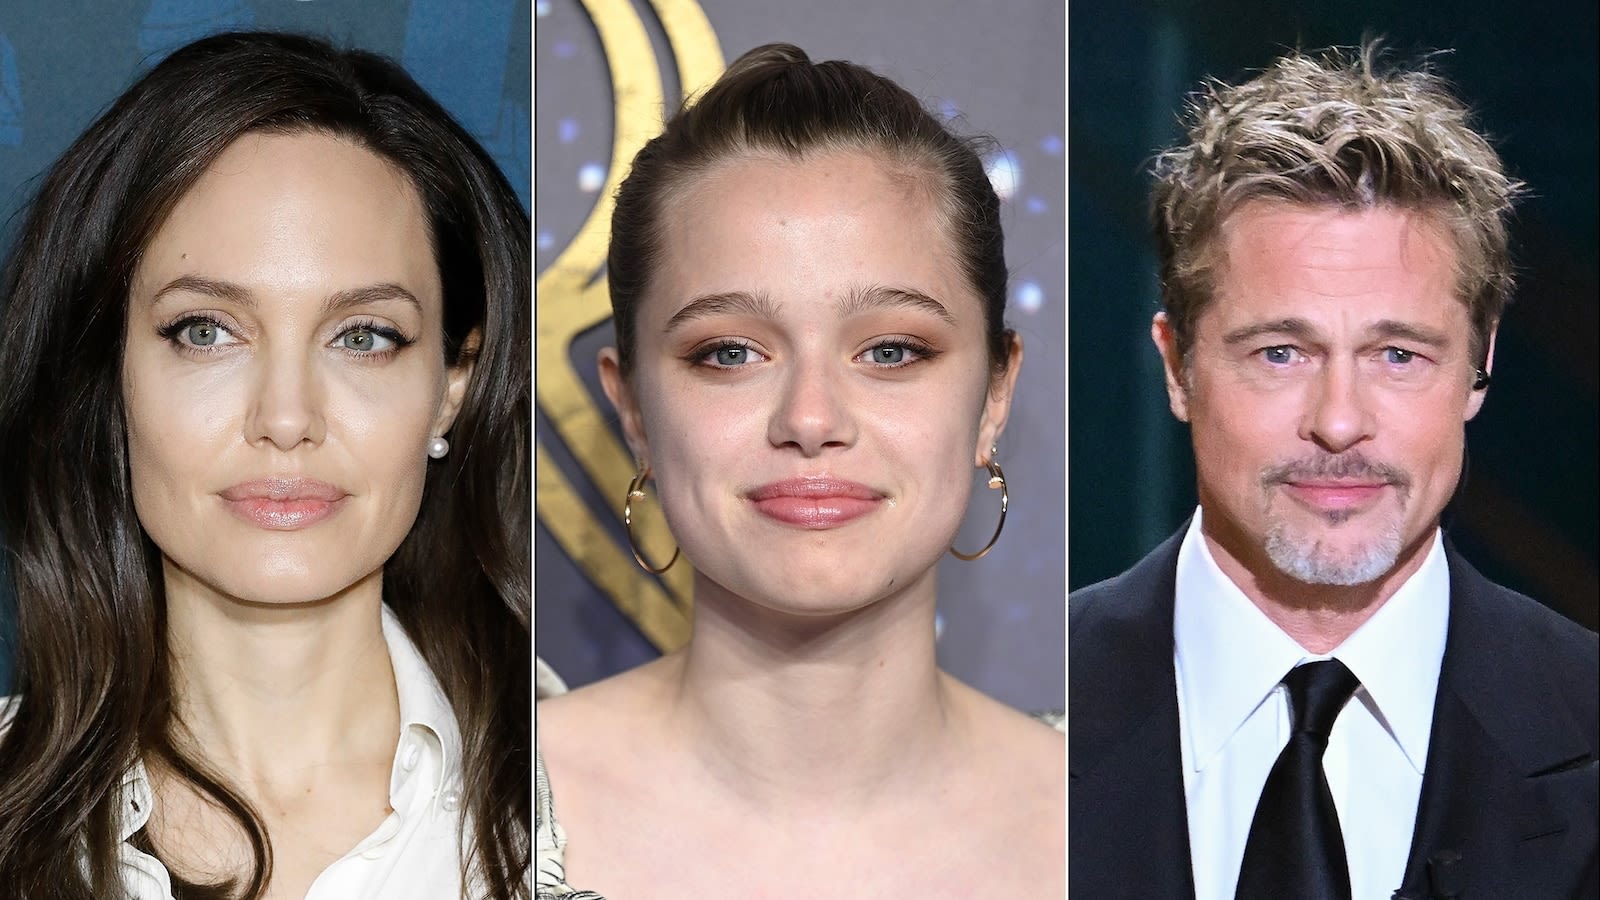 Angelina Jolie and Brad Pitt's daughter Shiloh confirms desire for name change in newspaper notice